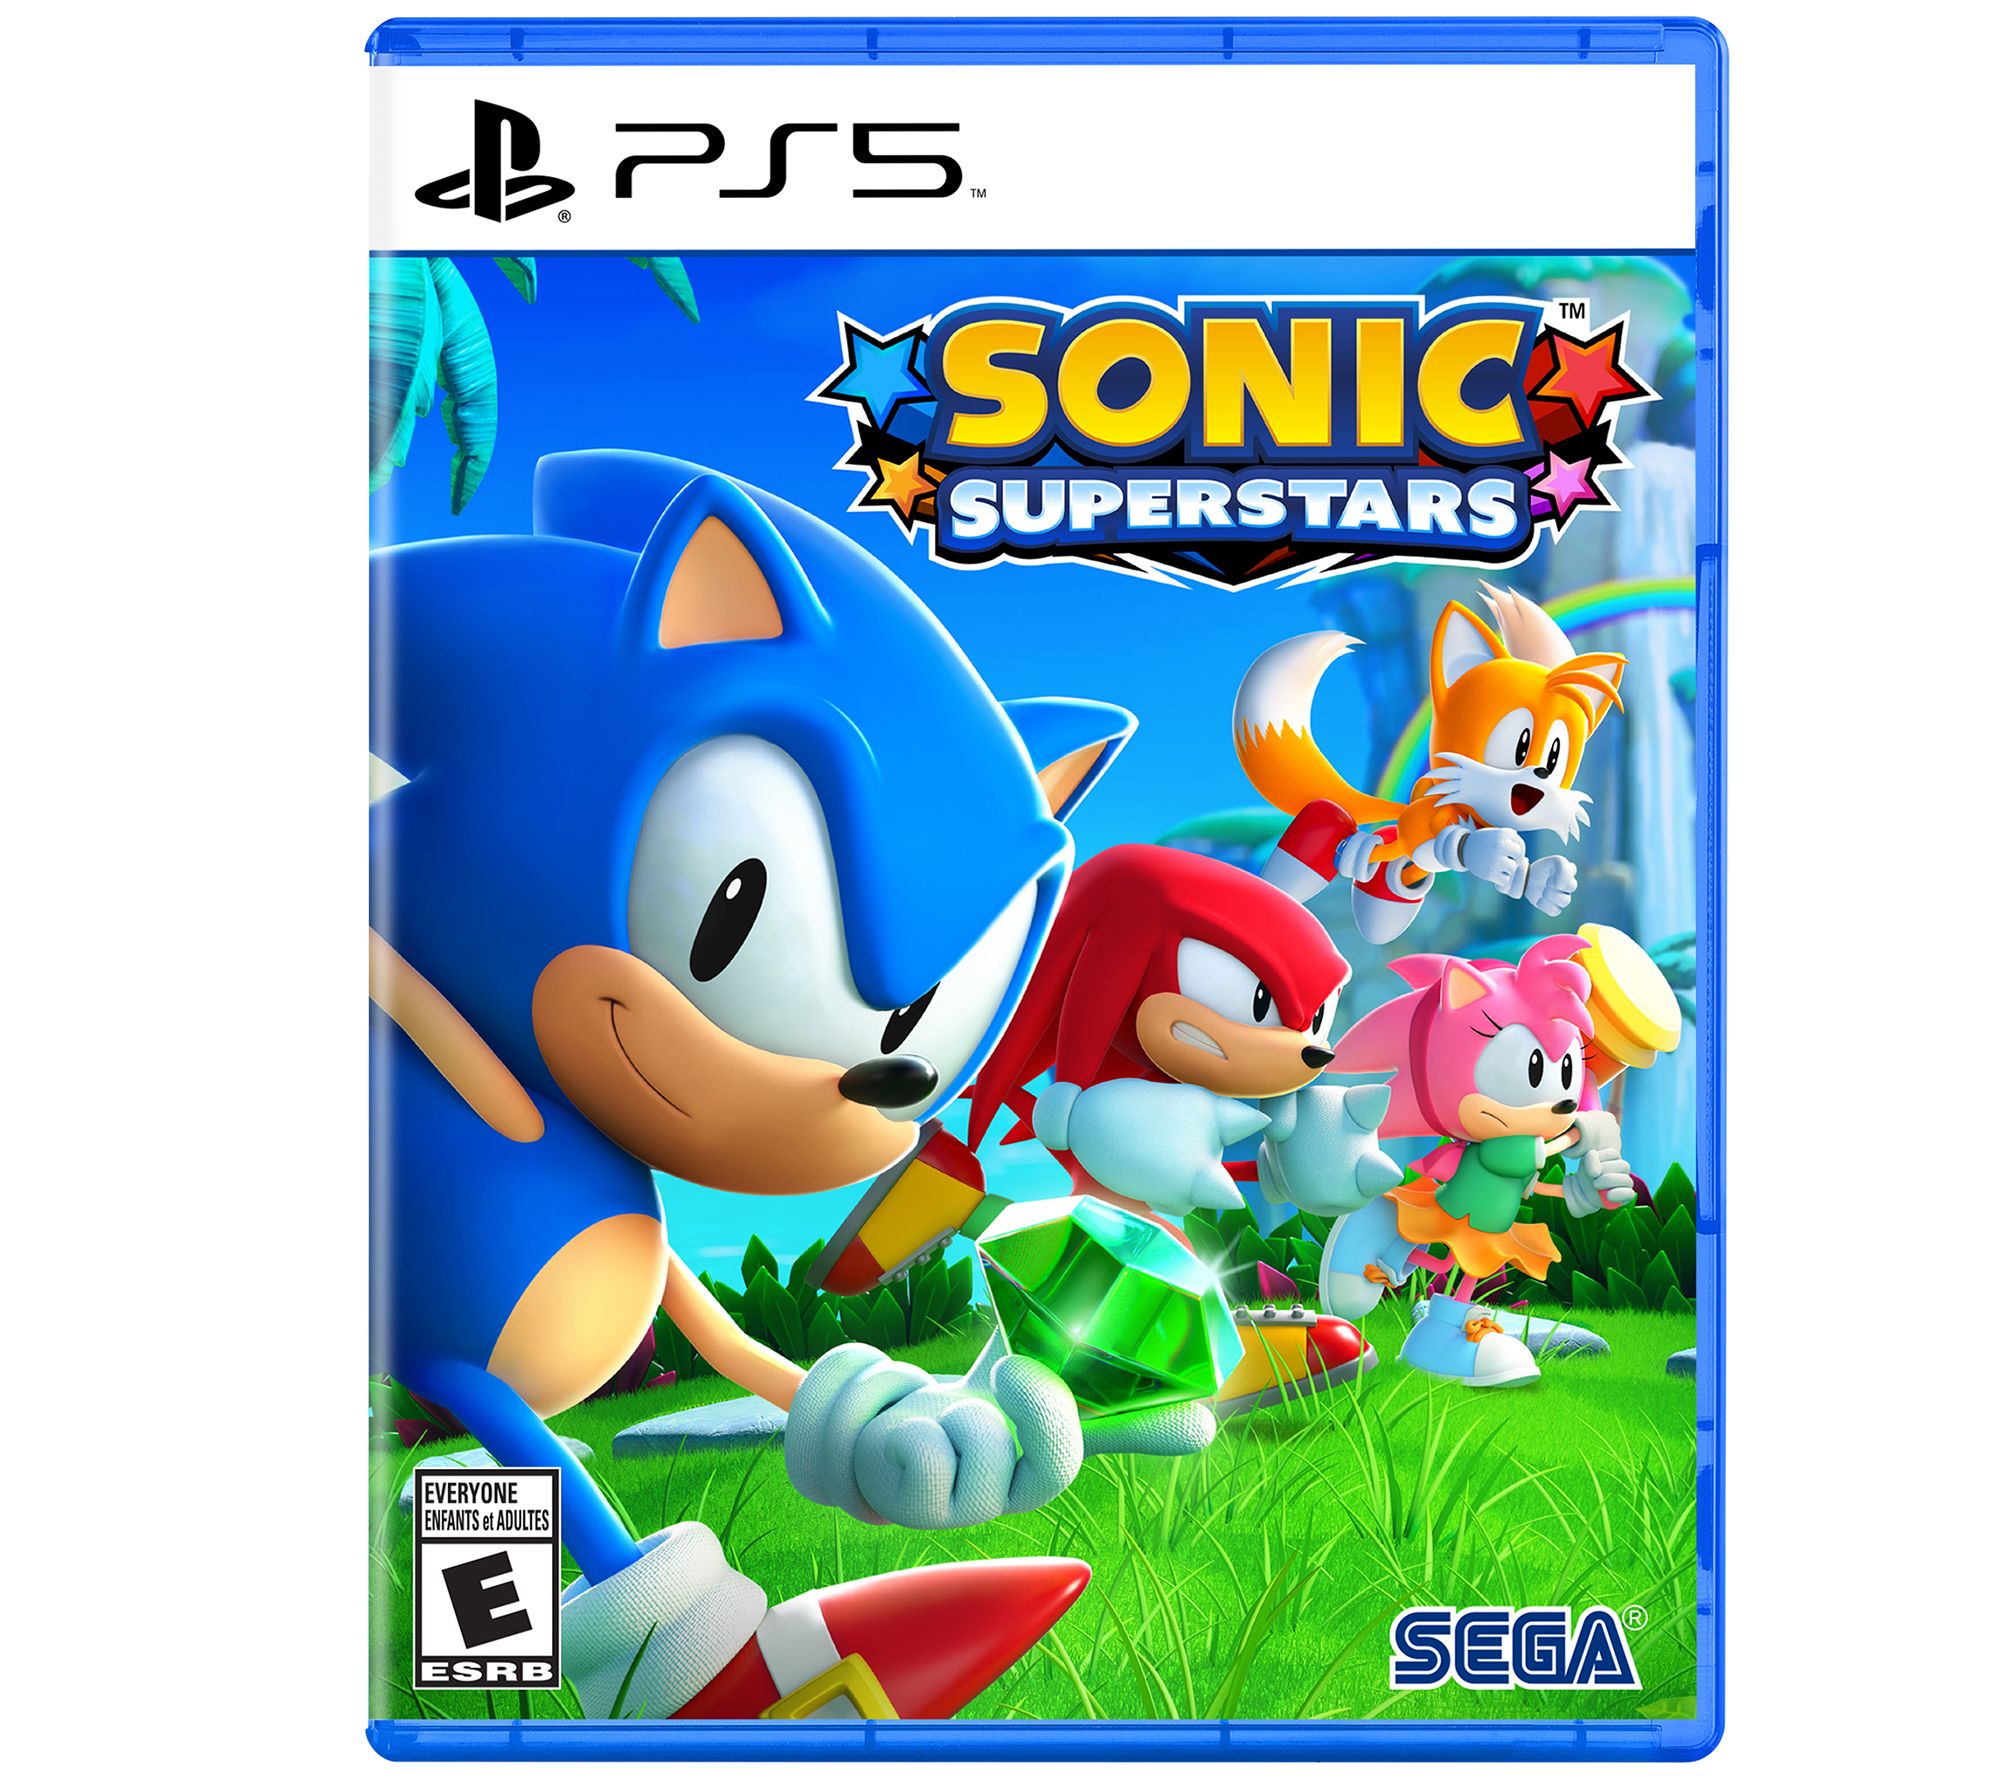 Sonic Classic Heroes: Full Game (Team Sonic) All Emeralds, No